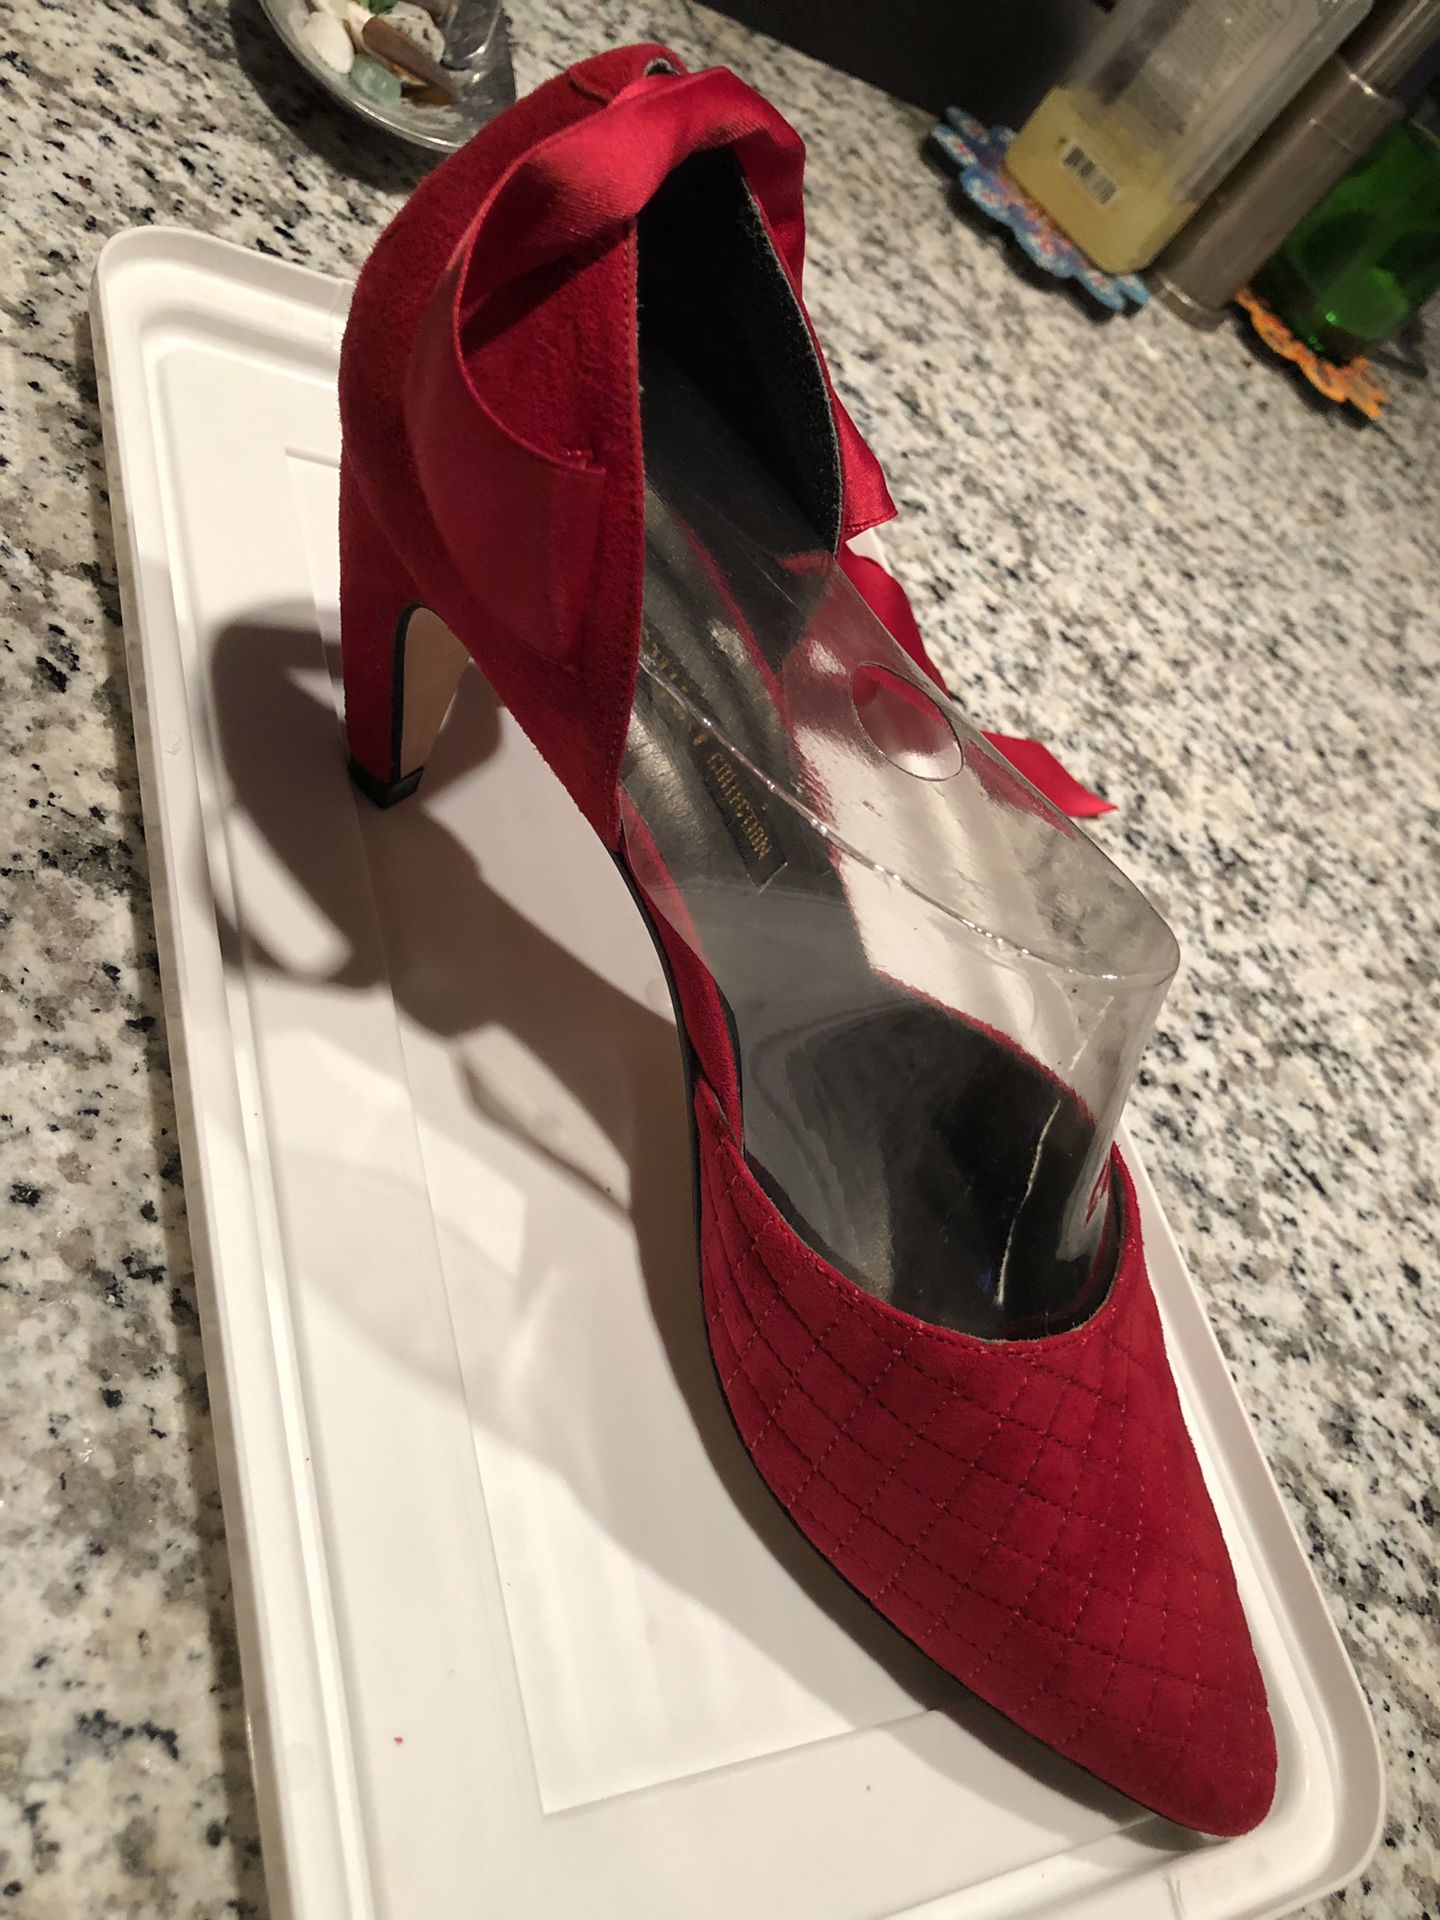 Red pumps with satin ribbon